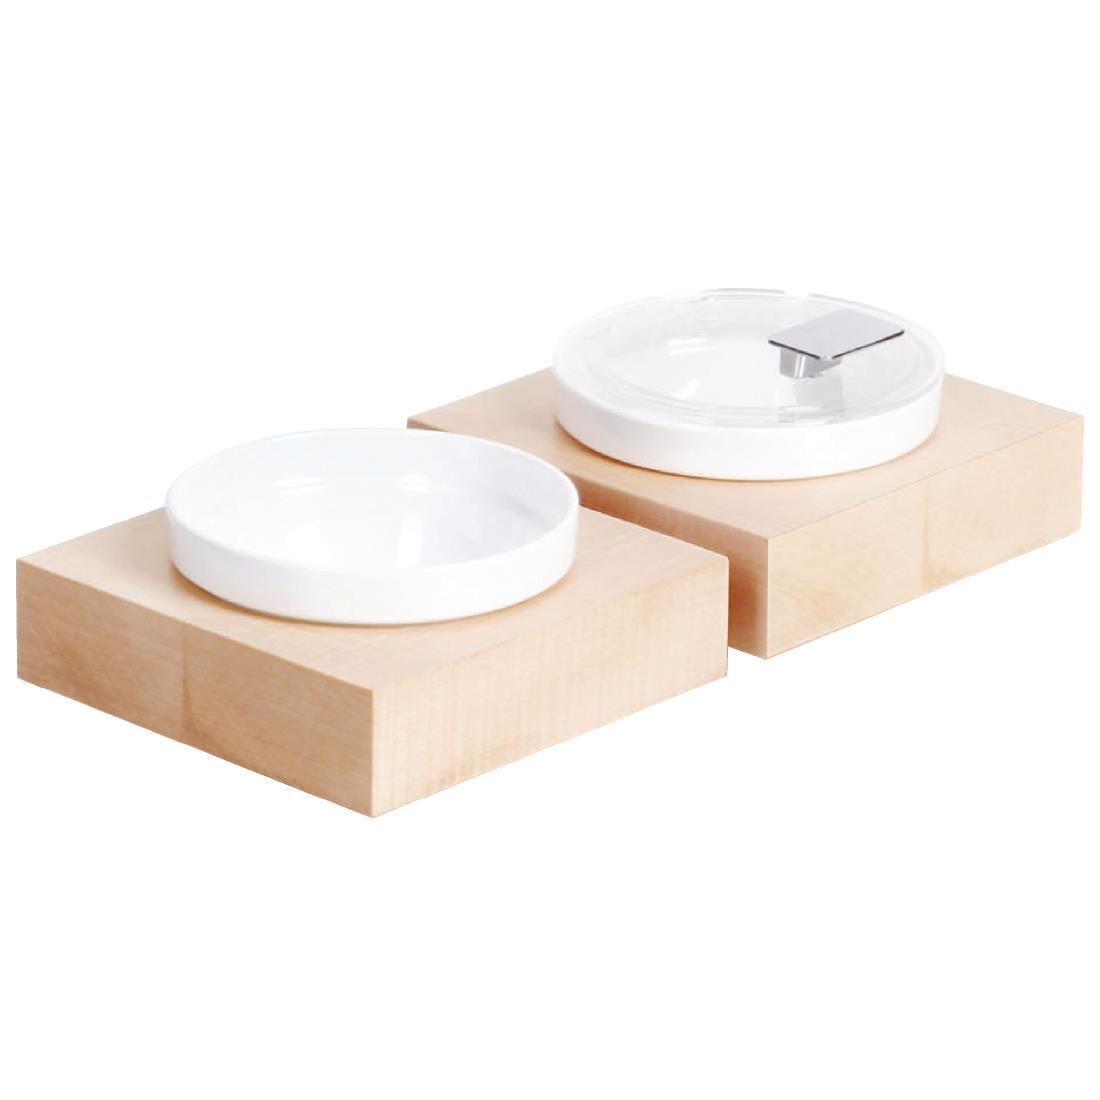 APS Frames Maple Wood Small Square Buffet Bowl Box - GC924  - 1